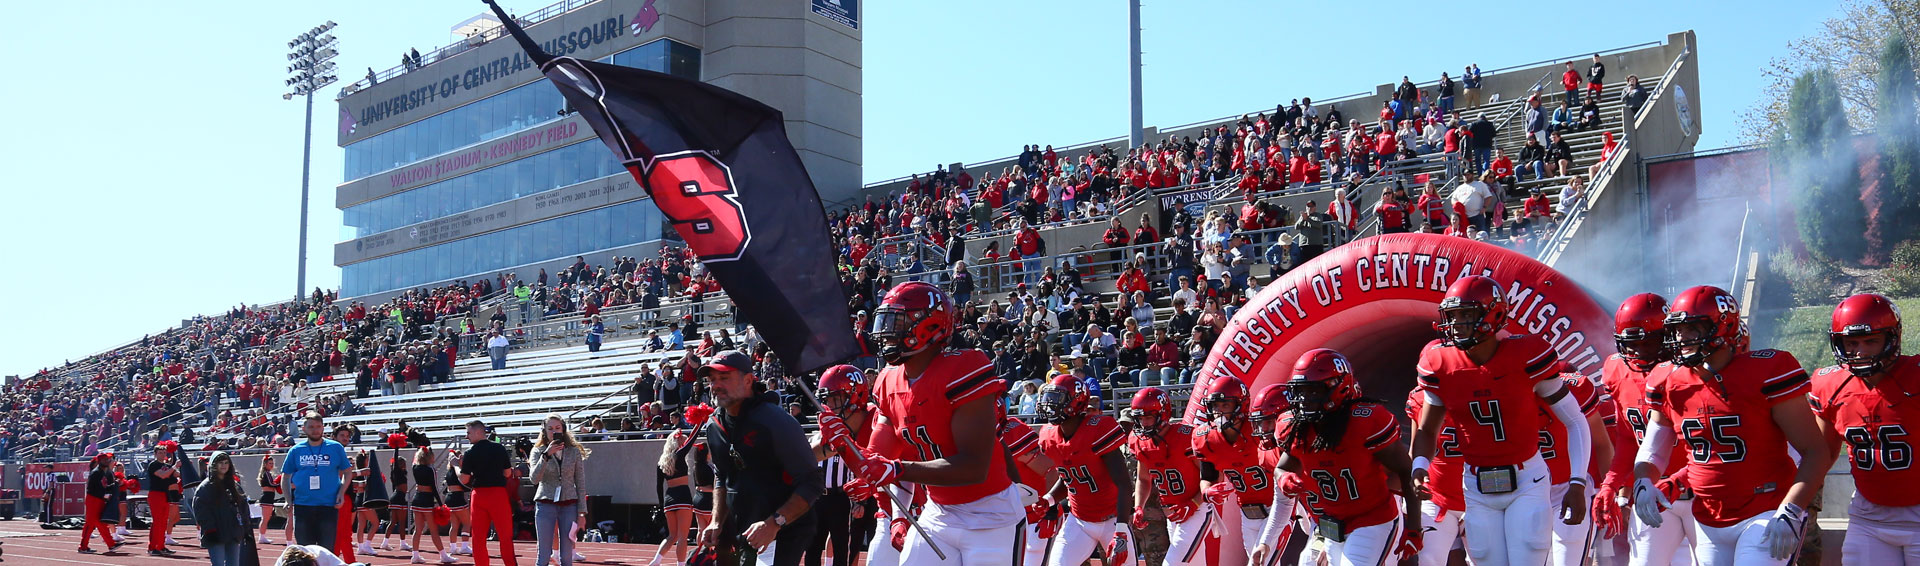 The UCM football team taking the field